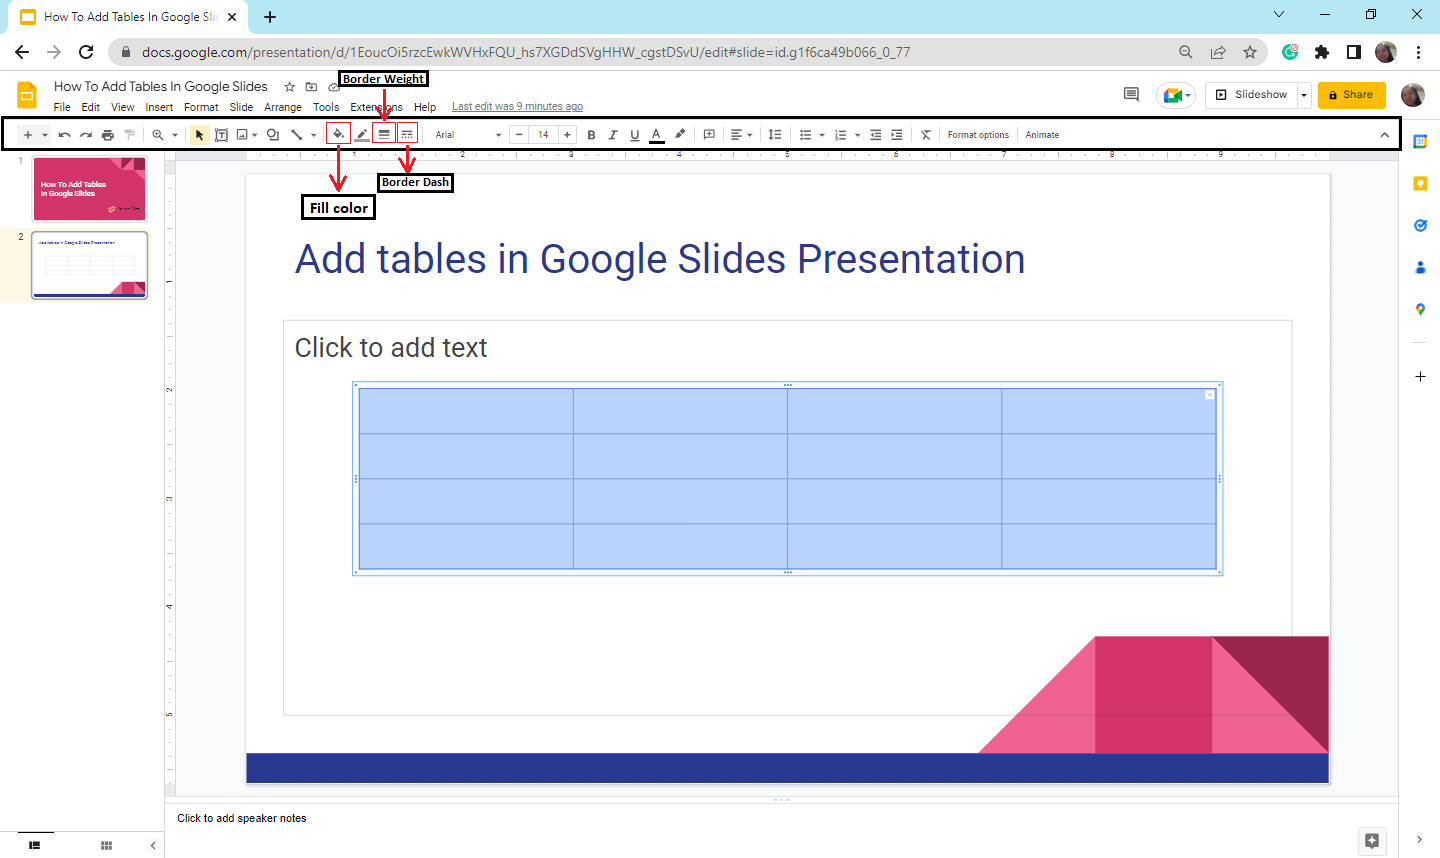 you can also select the option for "Fill color," "border weight," and "border dash" to customize your table.